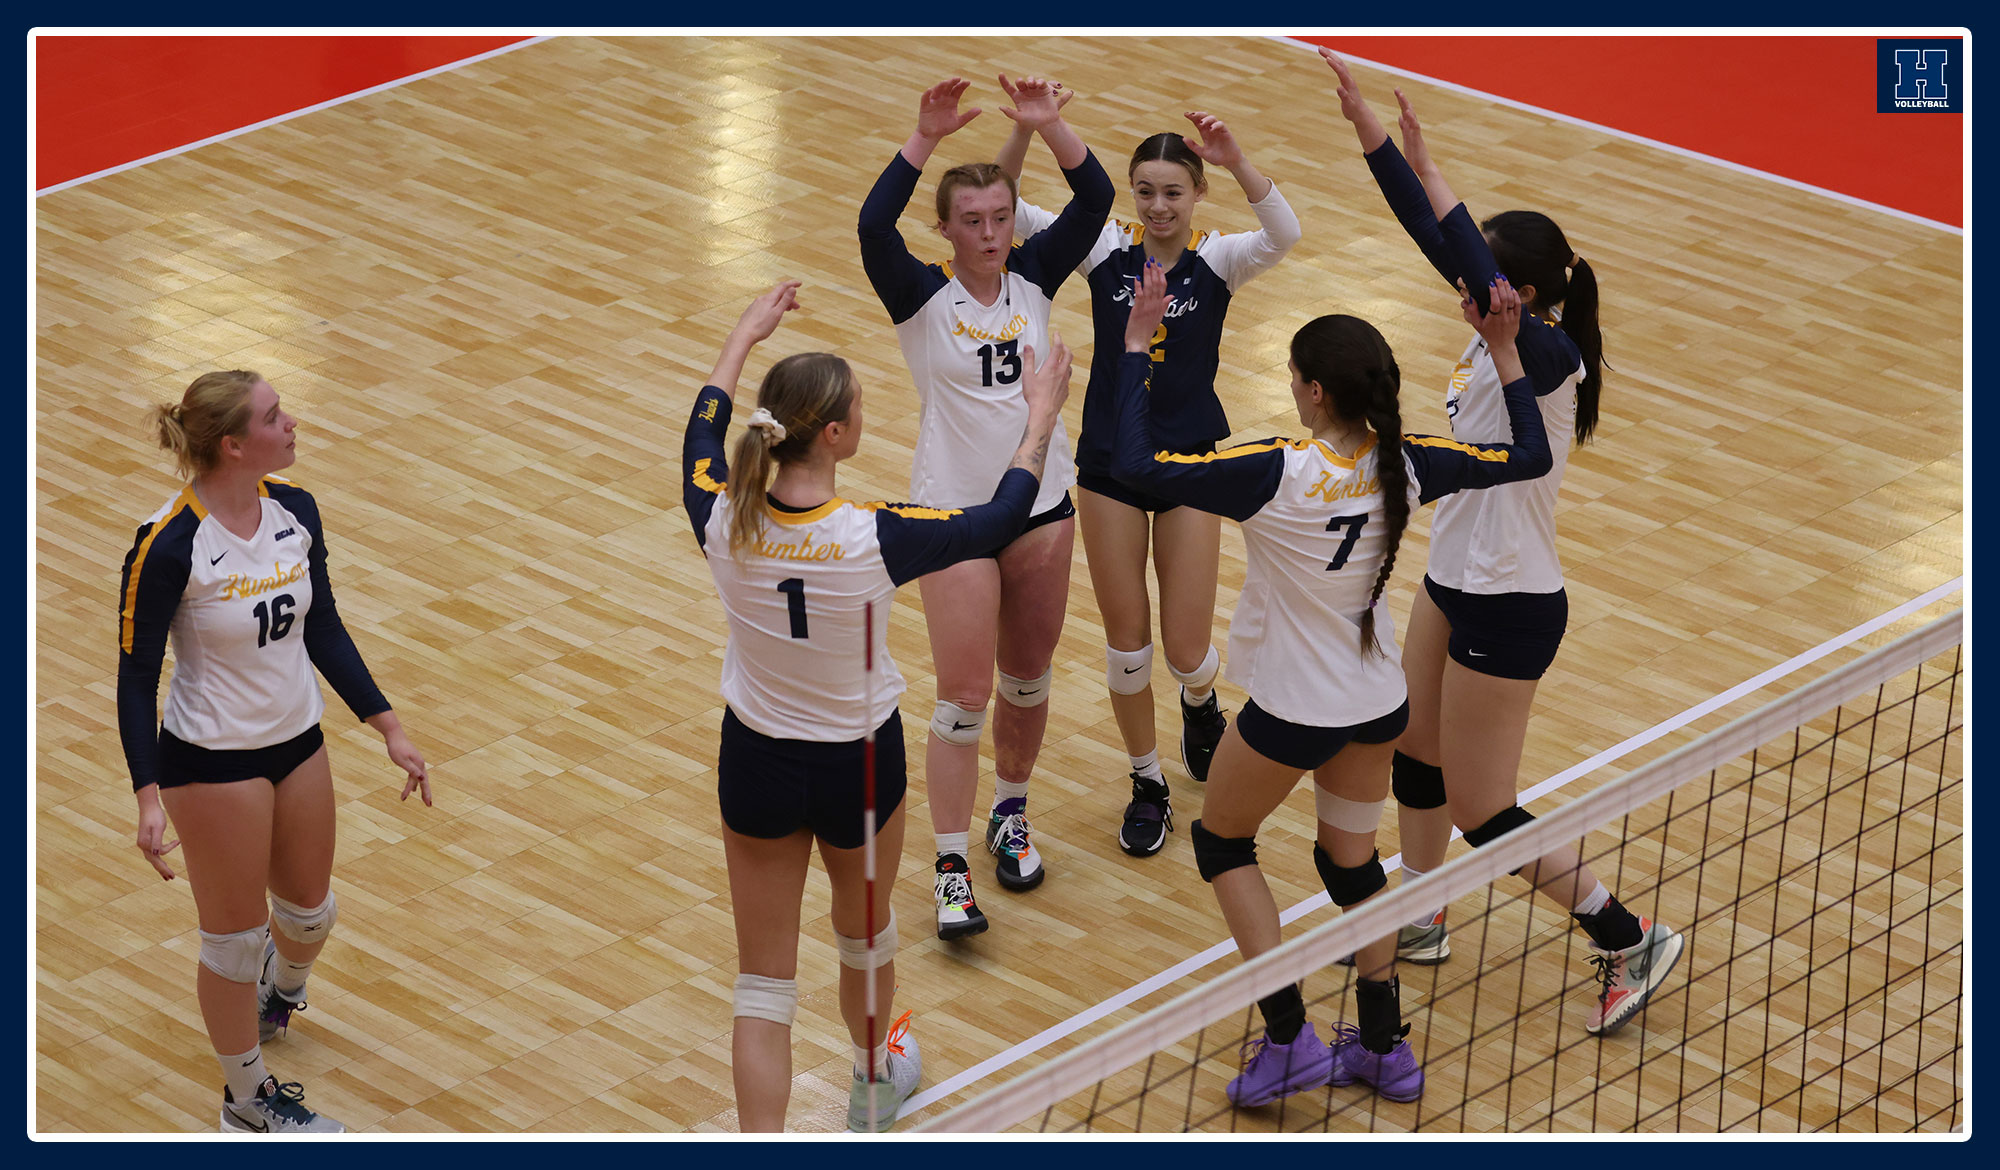 Women's volleyball celebrating a point